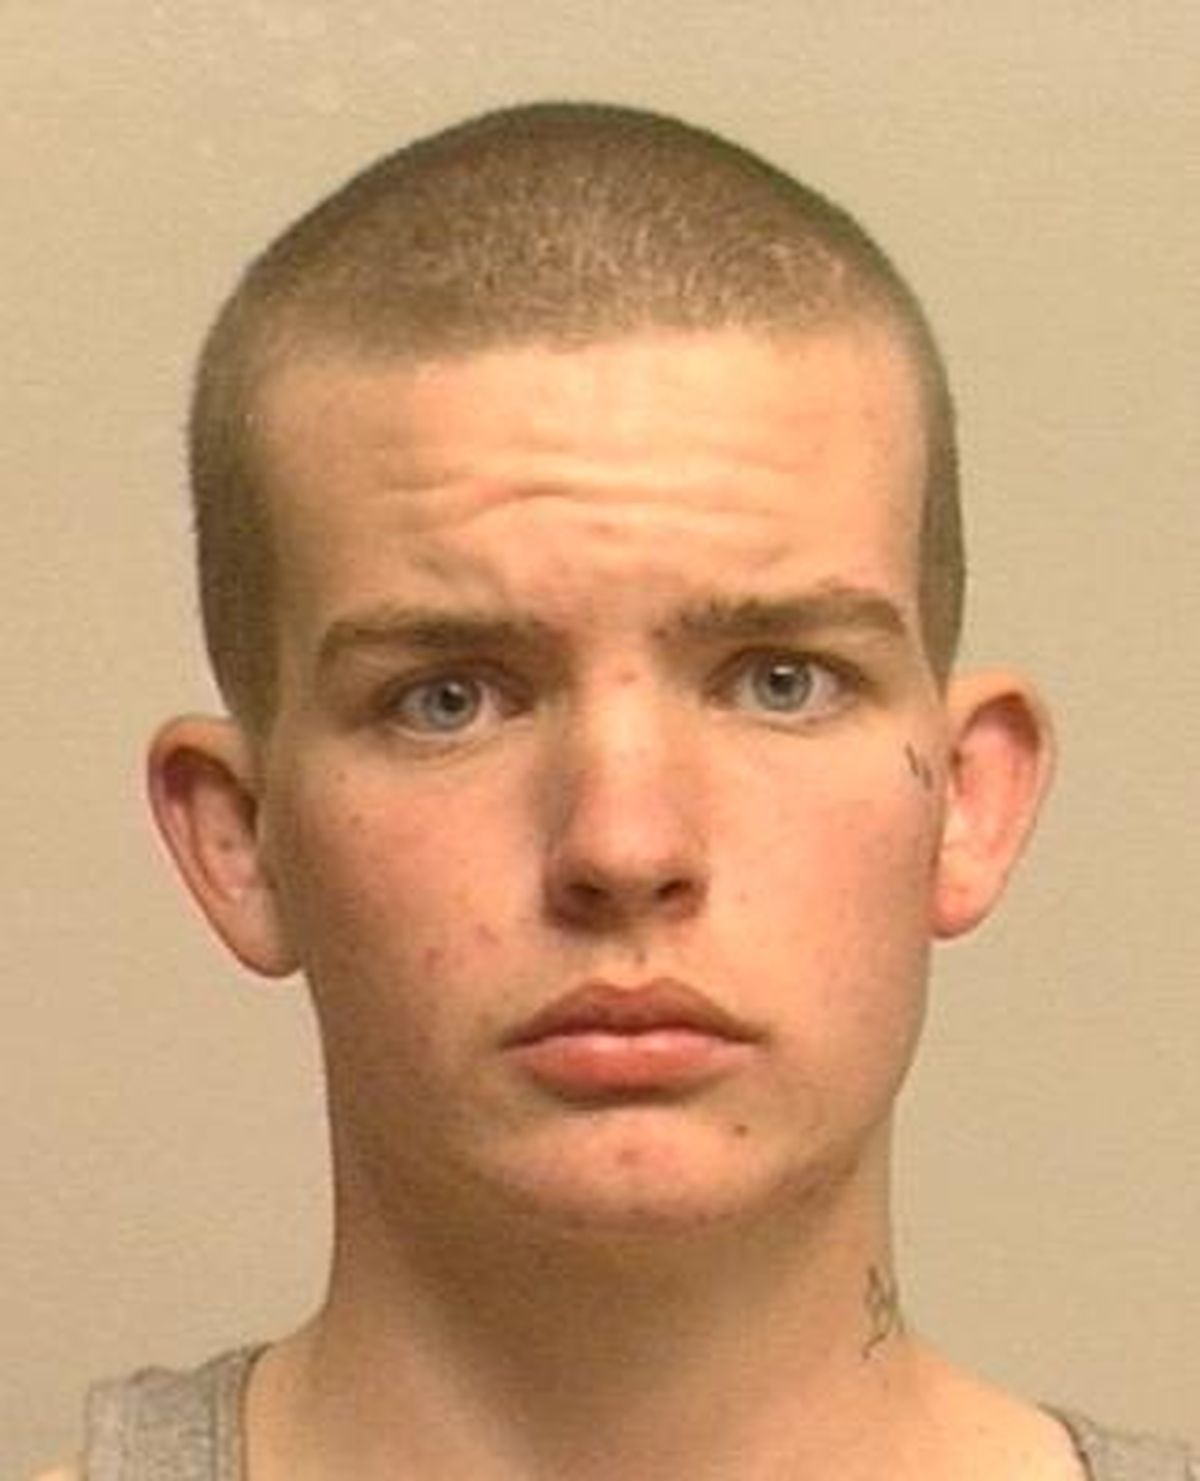 Aaron Lee Goldstein, 18, is wanted for armed robbery. (Spokane County Sheriff